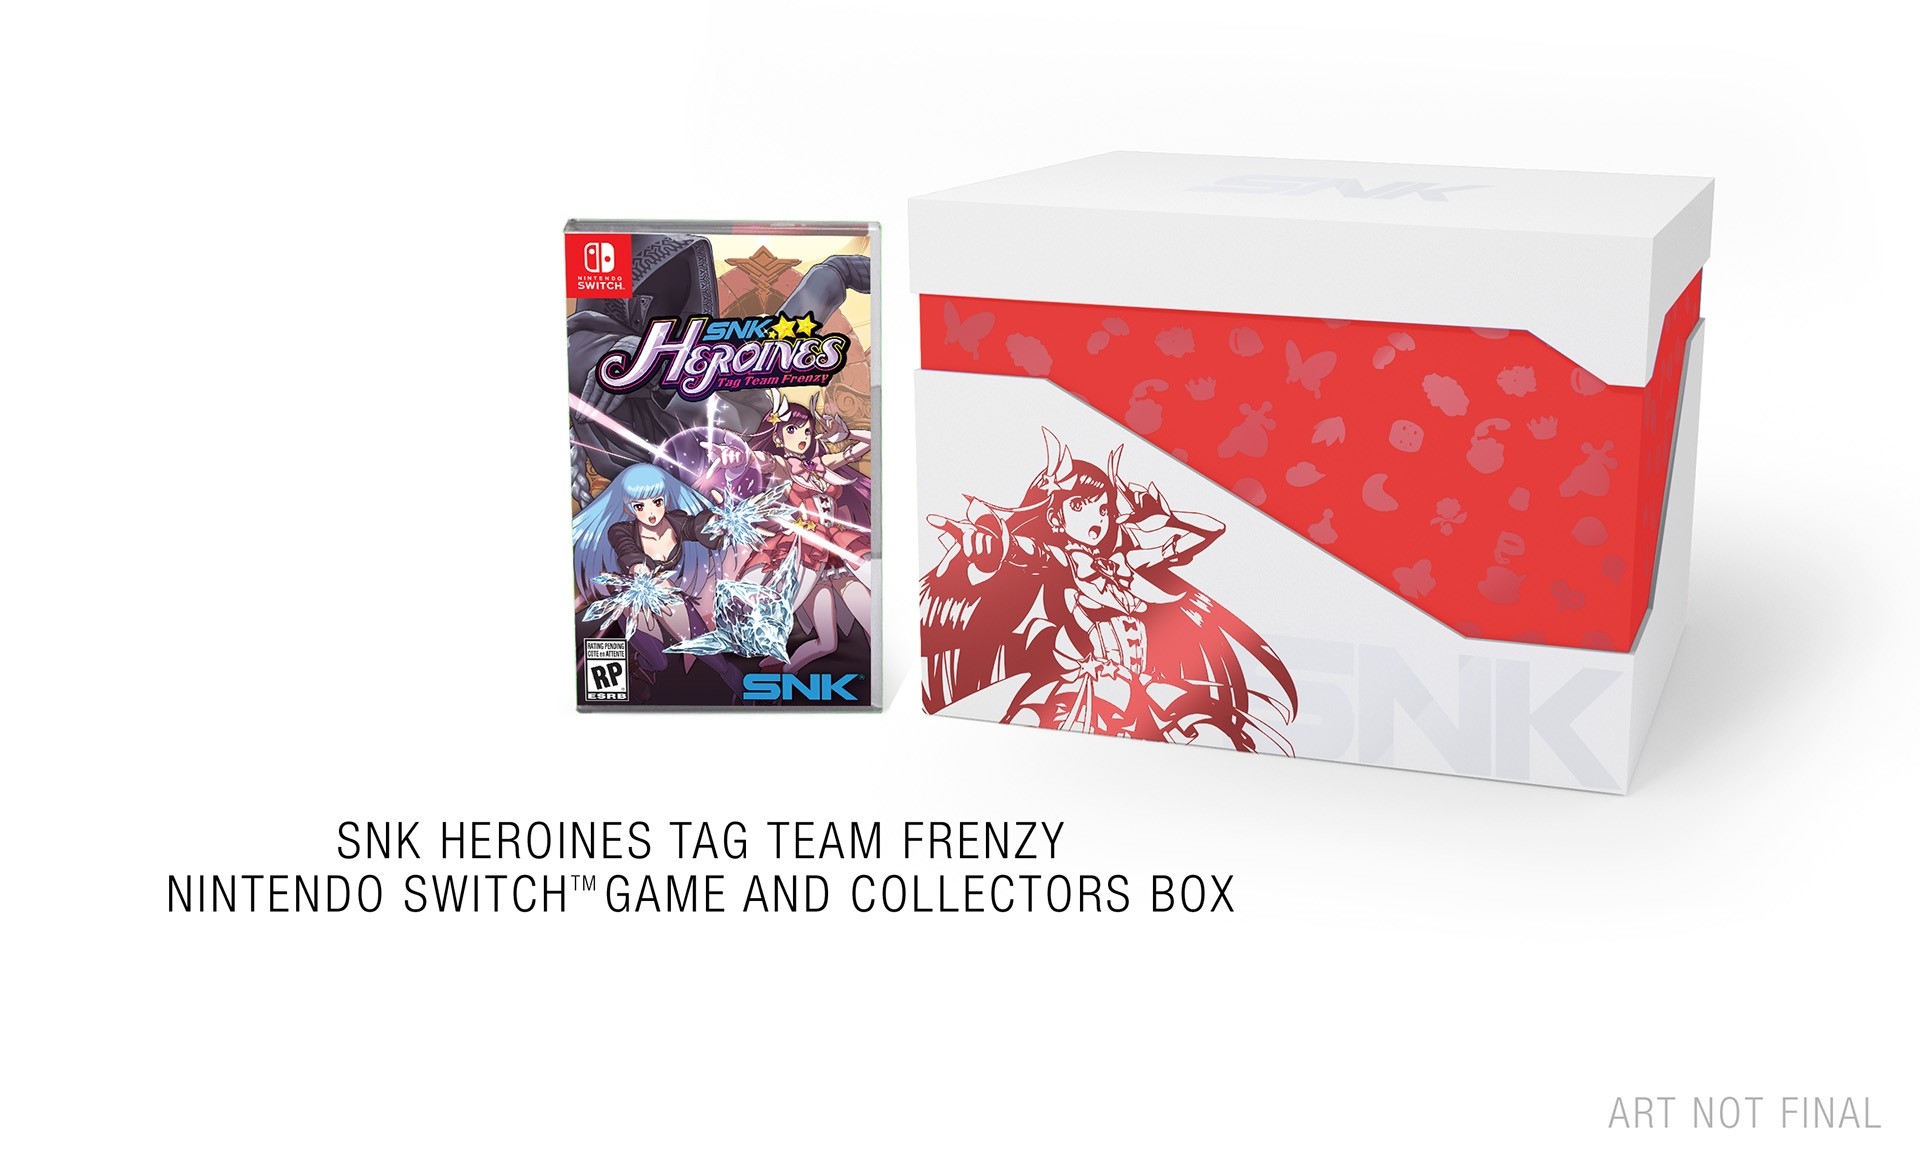 snk-heroines-tag-team-frenzy-collectors-box-photo